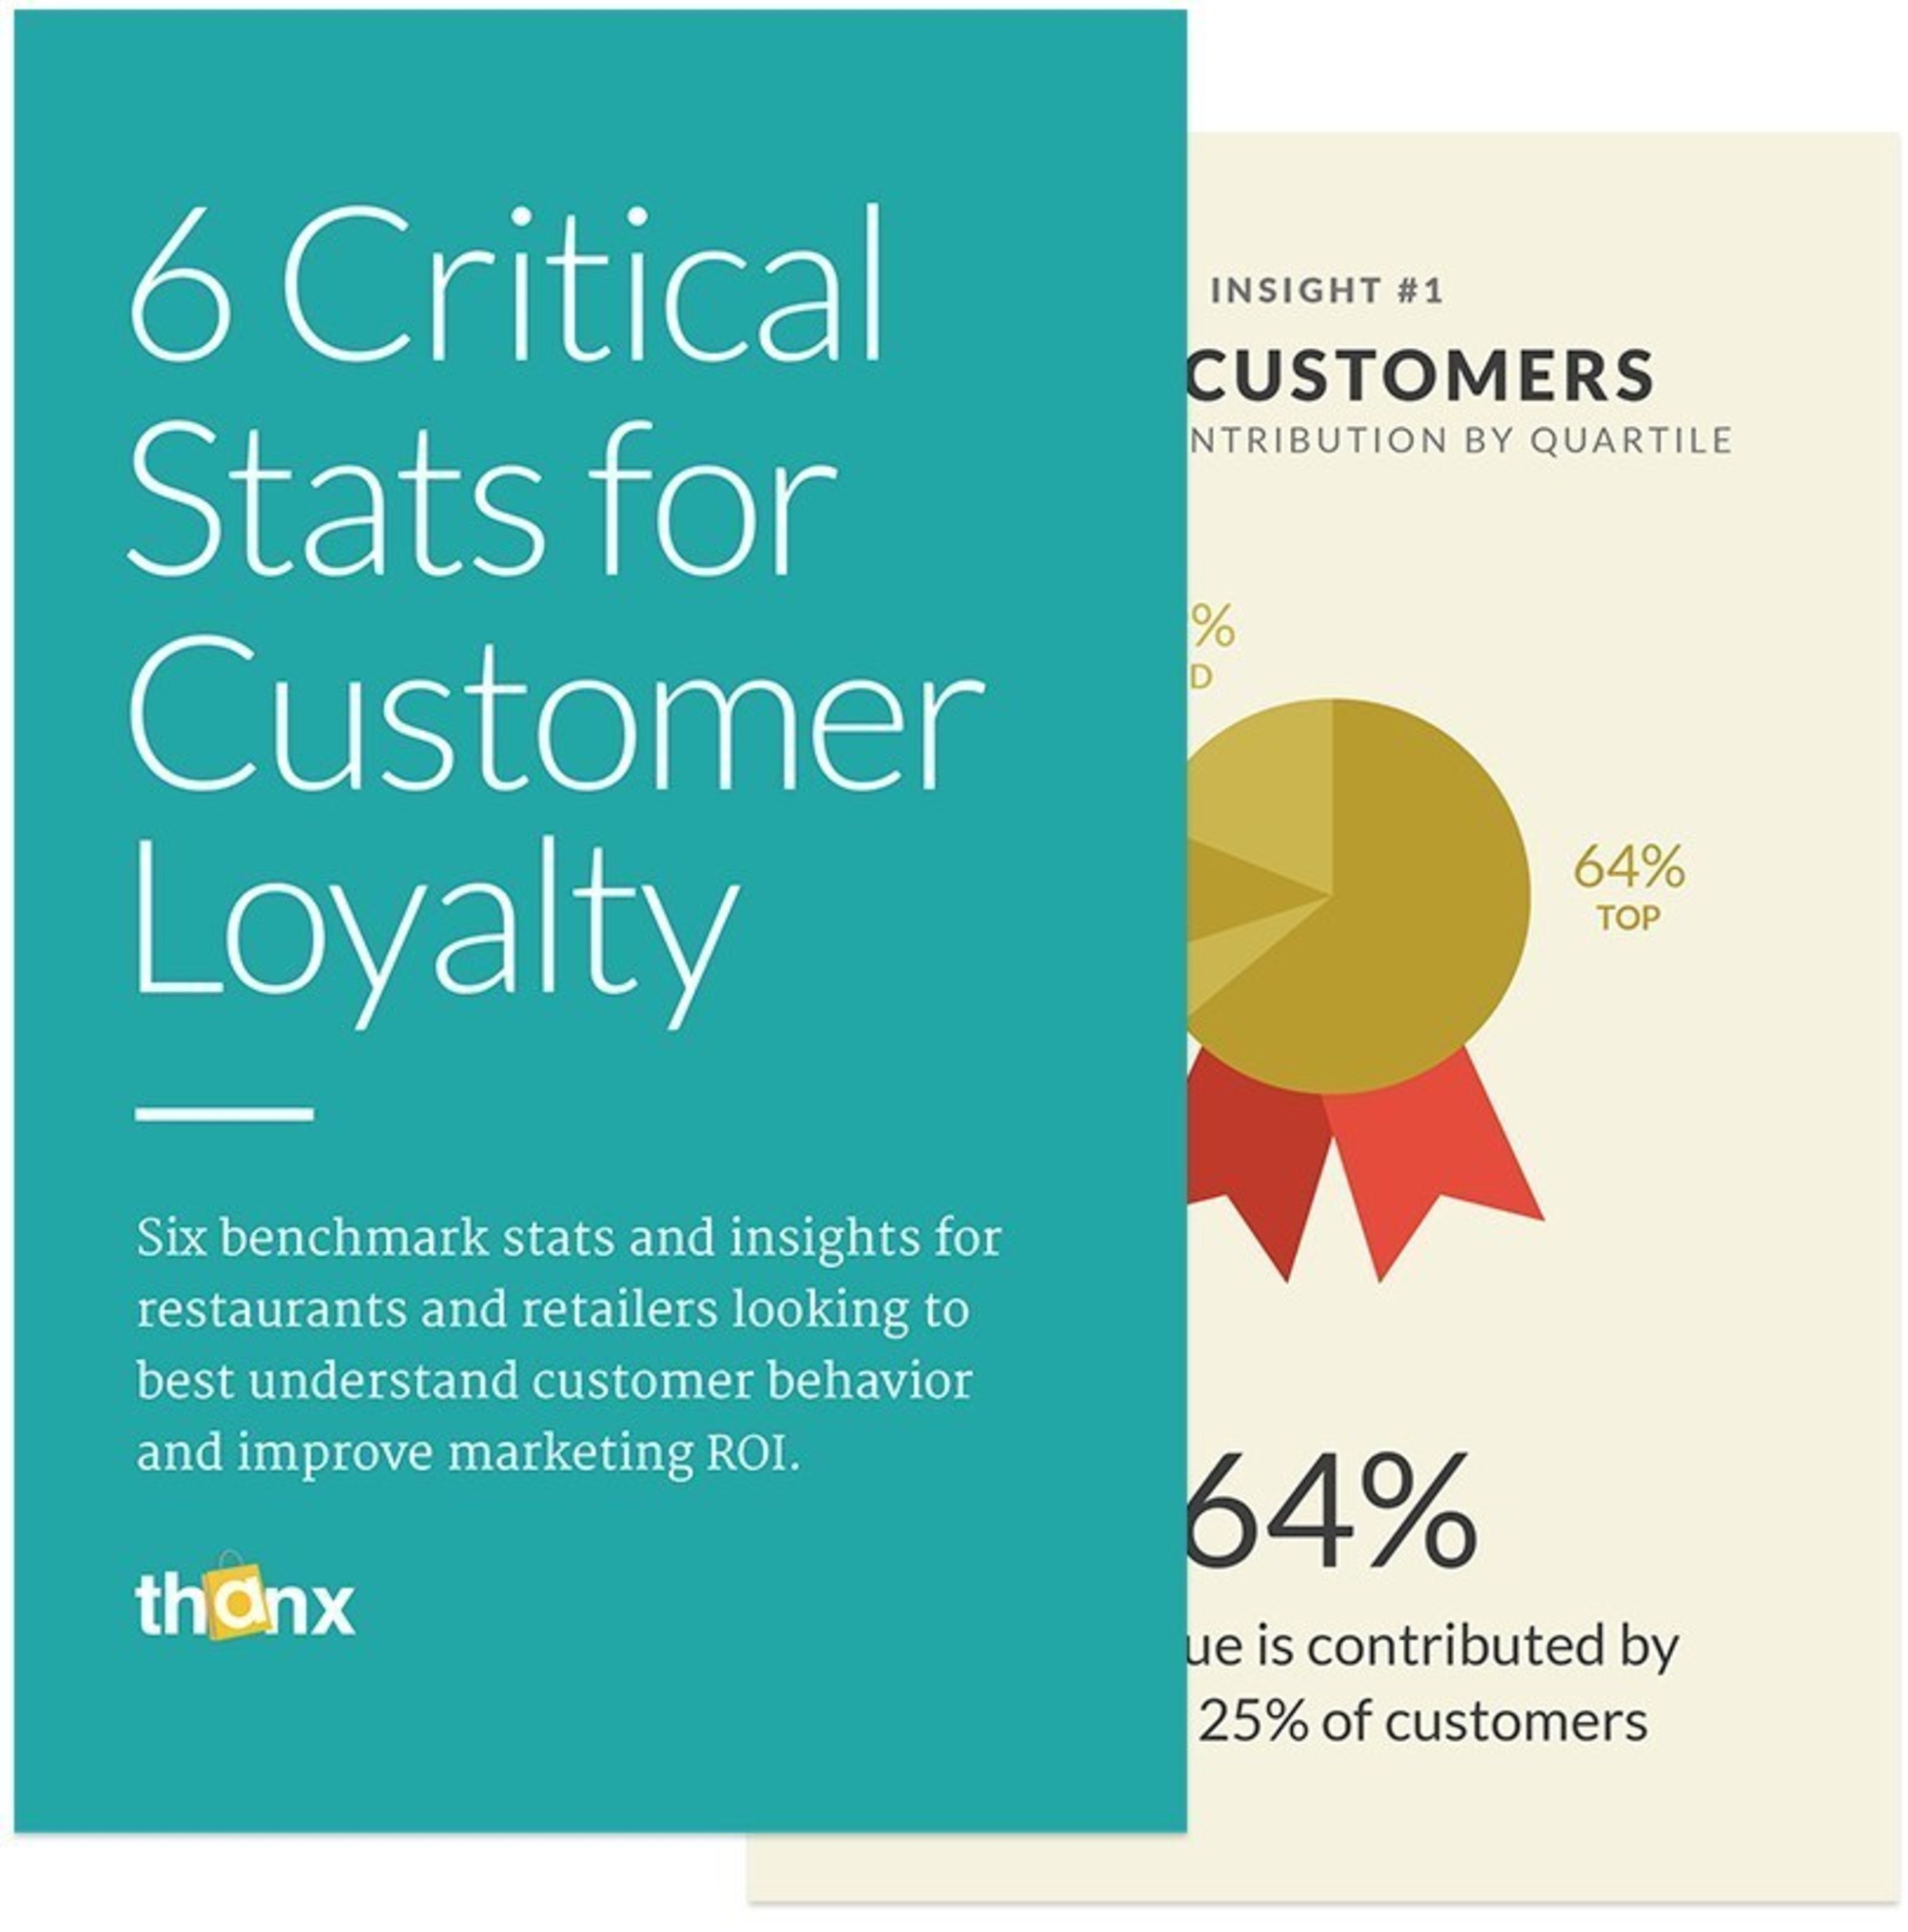 New Thanx study confirms that the top quartile of customers contribute nearly two-thirds of revenue.